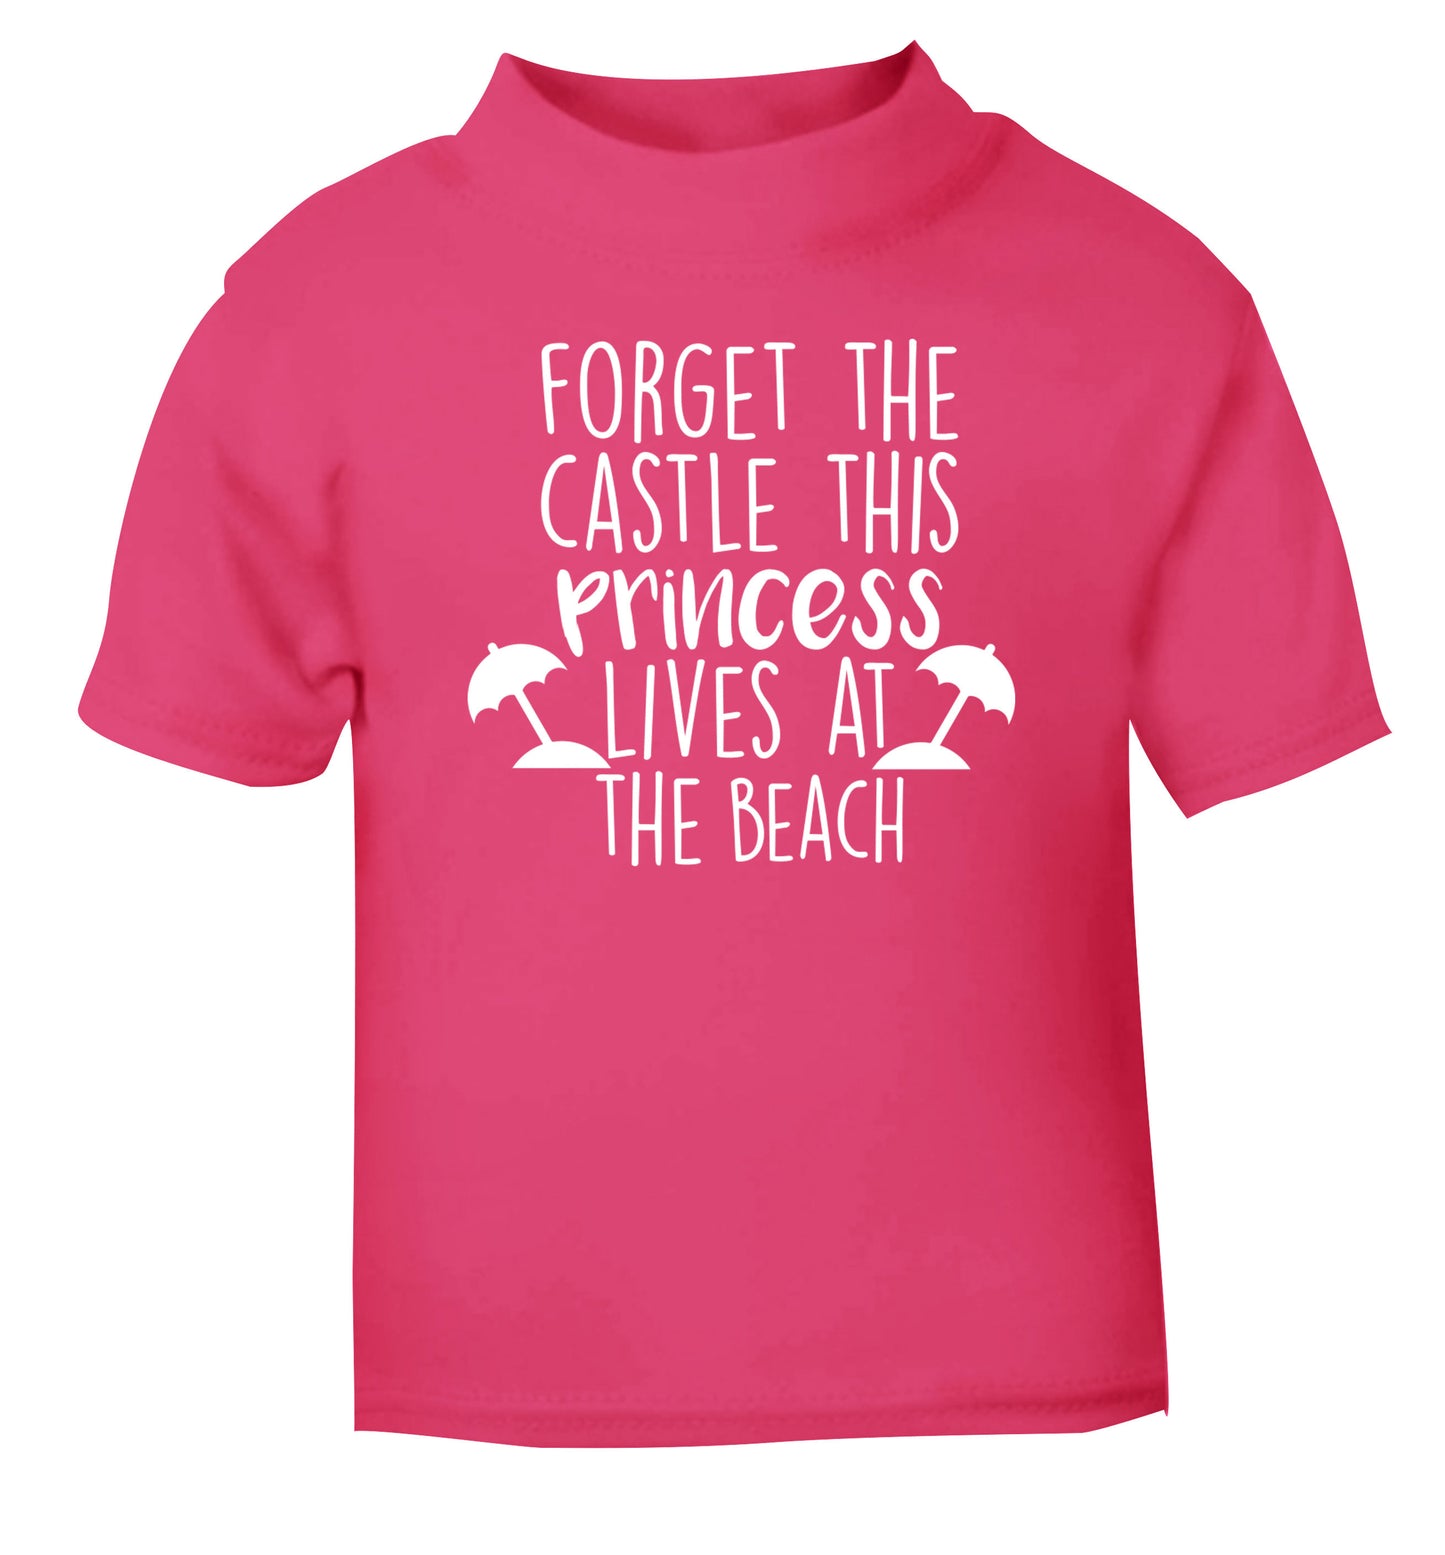 Forget the castle this princess lives at the beach pink Baby Toddler Tshirt 2 Years